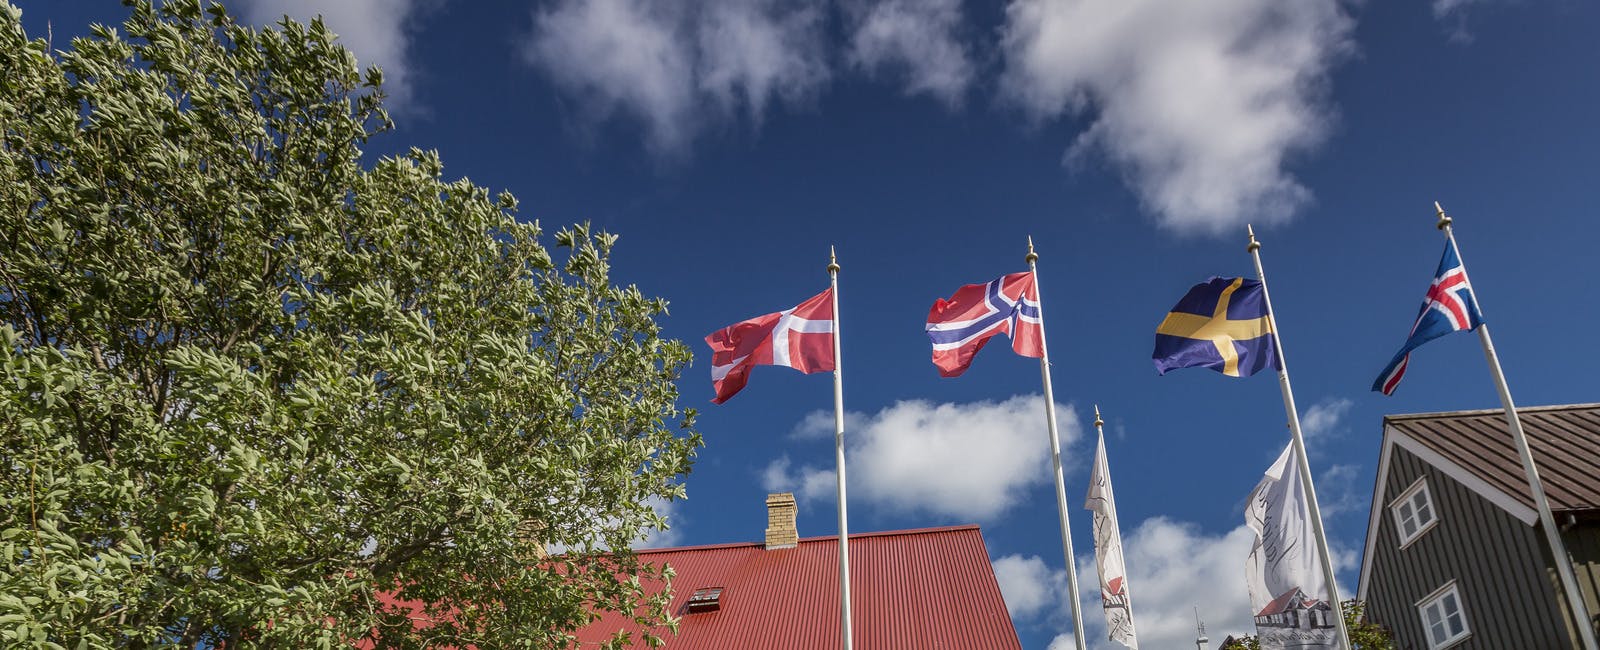 Flags of Denmark, Norway, Sweden and Iceland